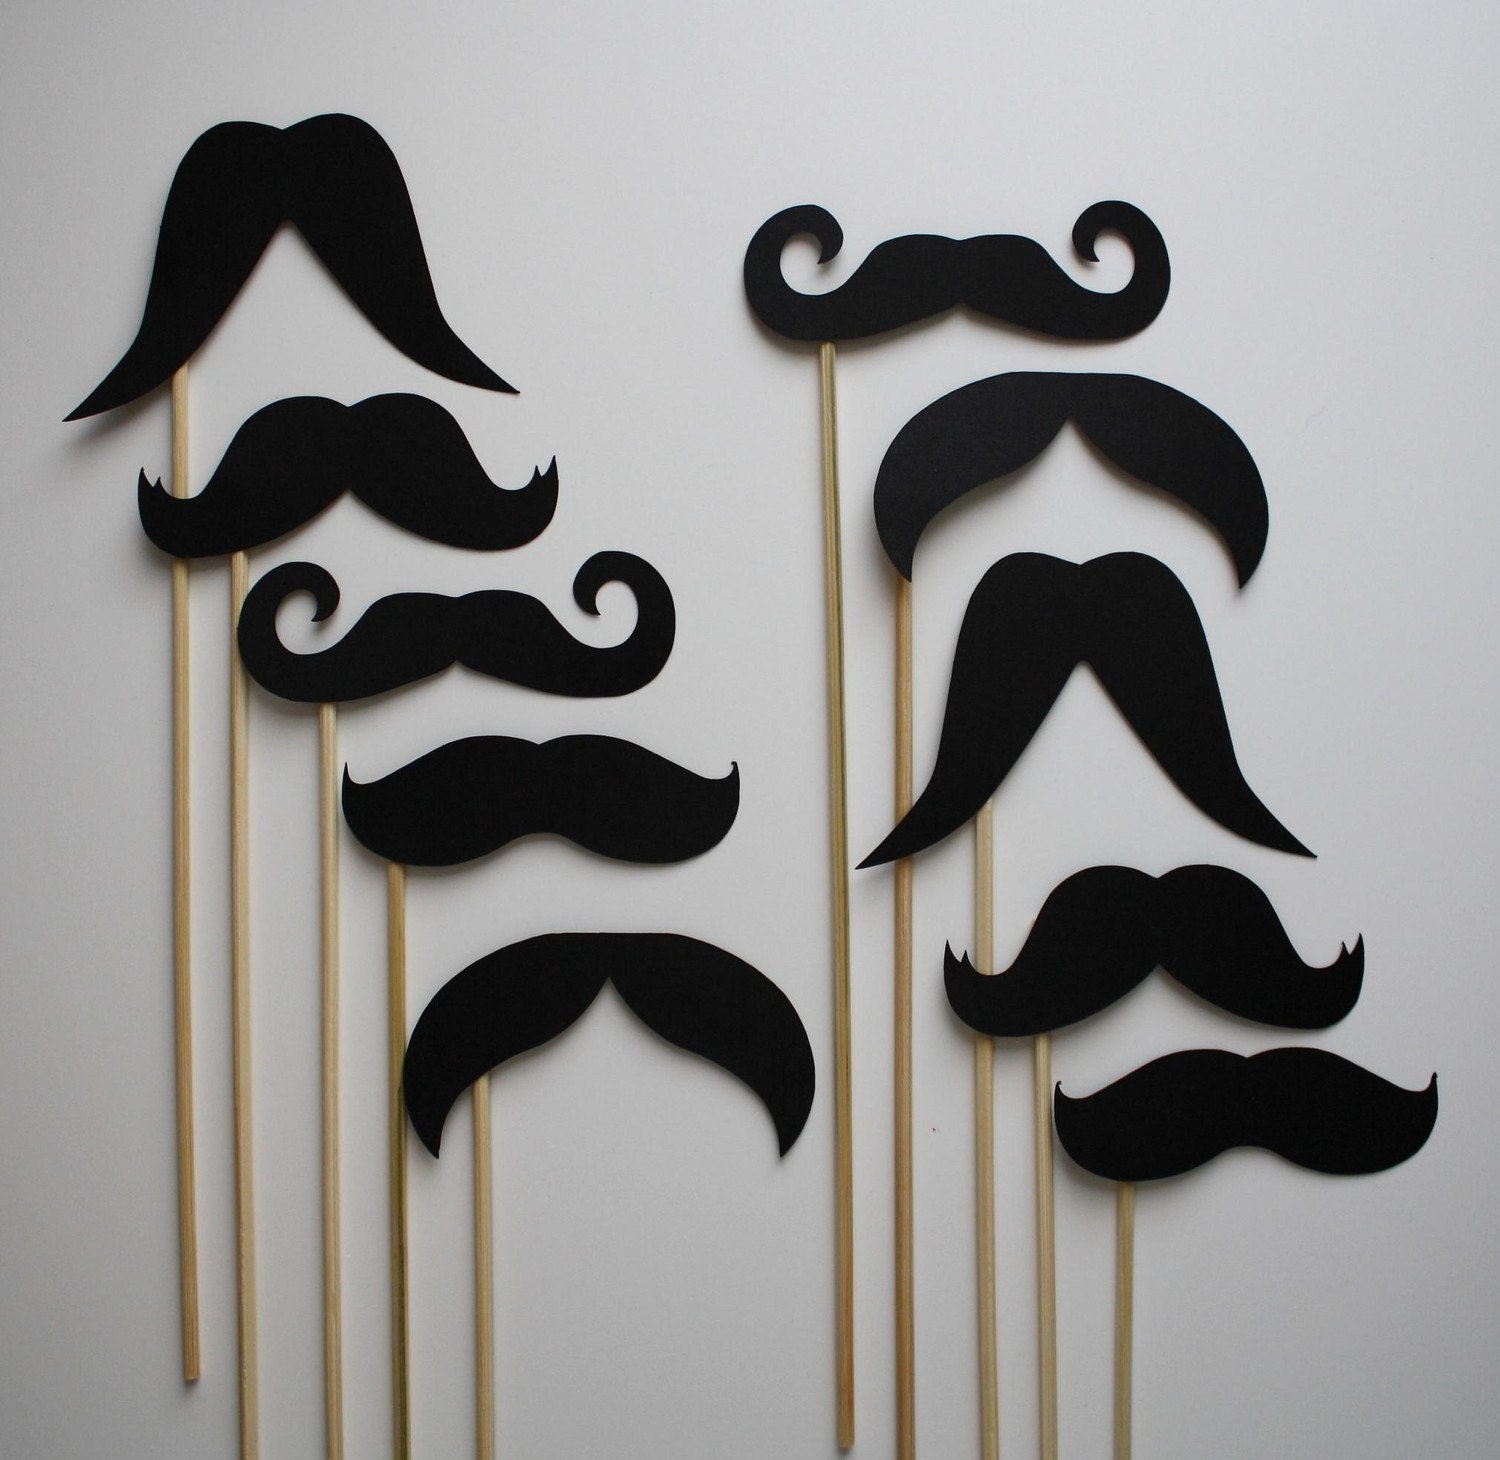 Mustache on a Stick - The All Stache Pack